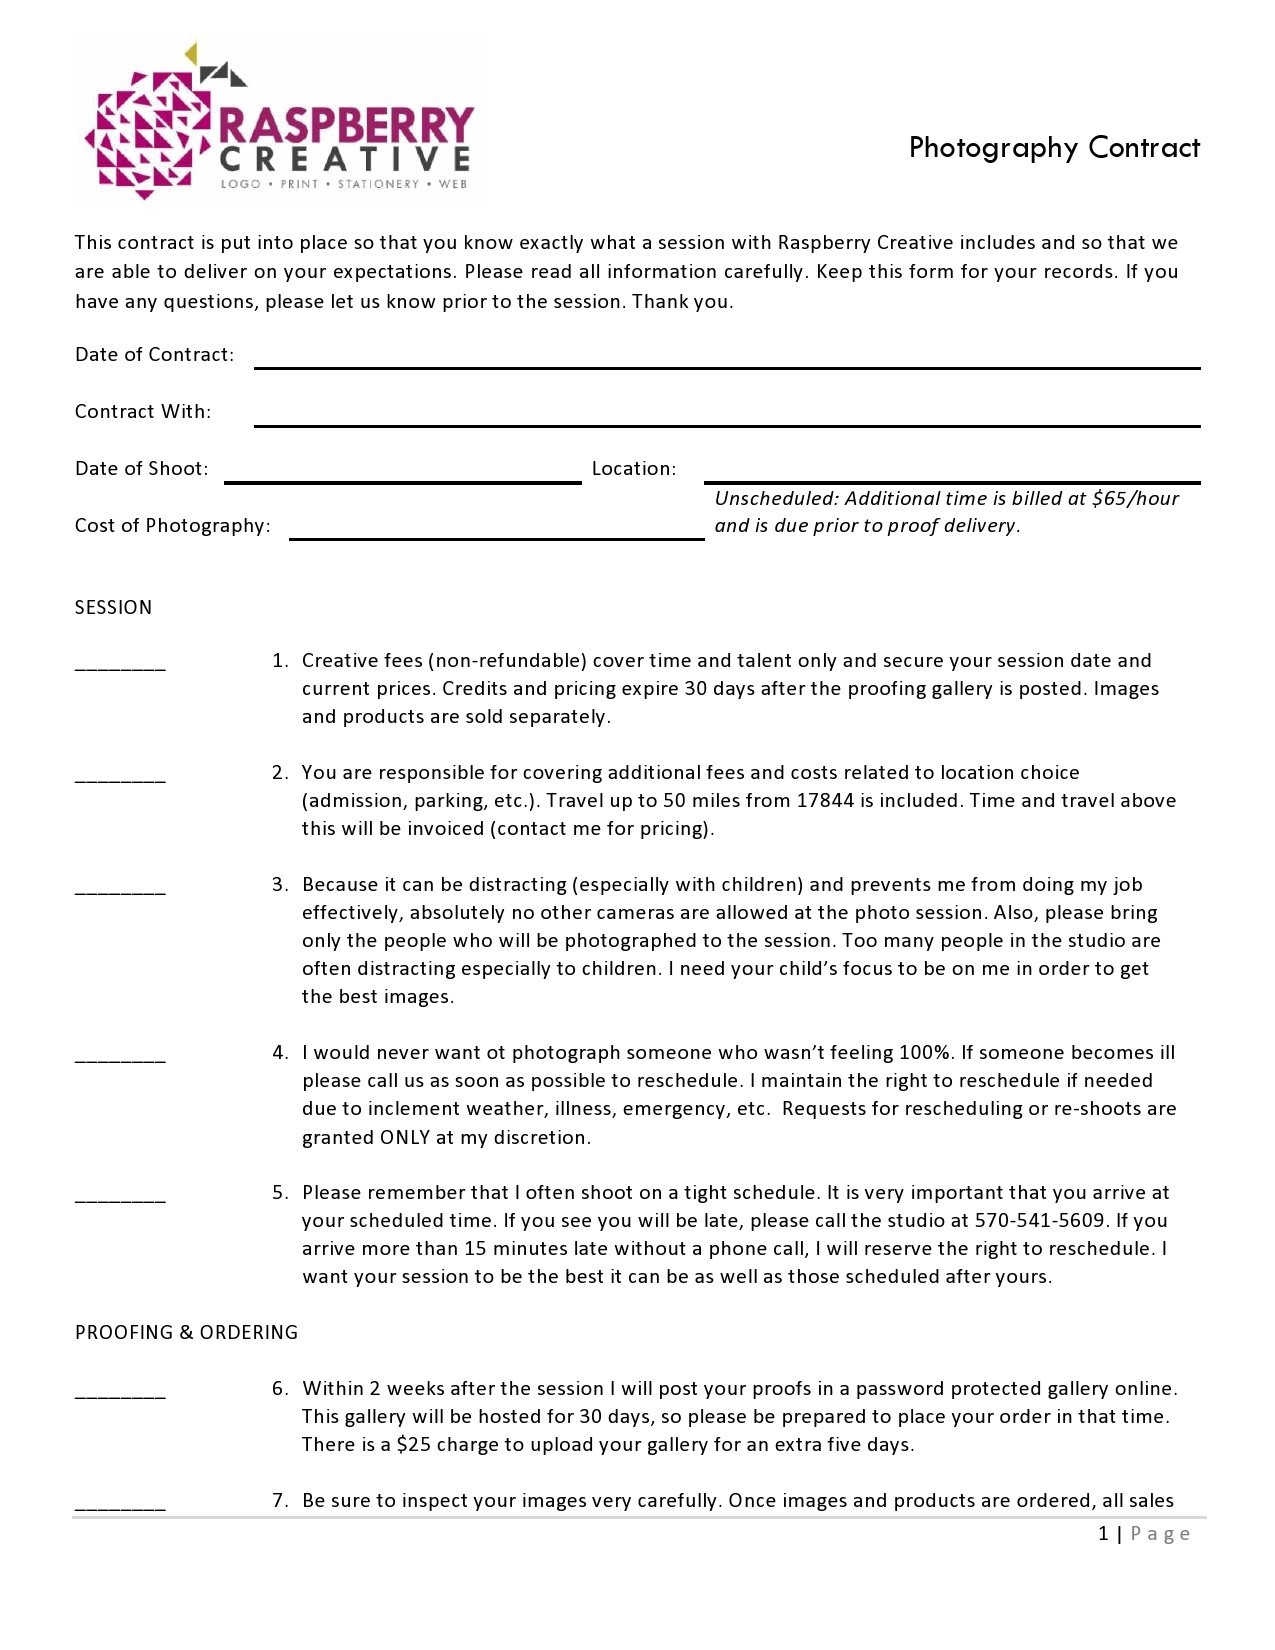 Free photography contract template 20